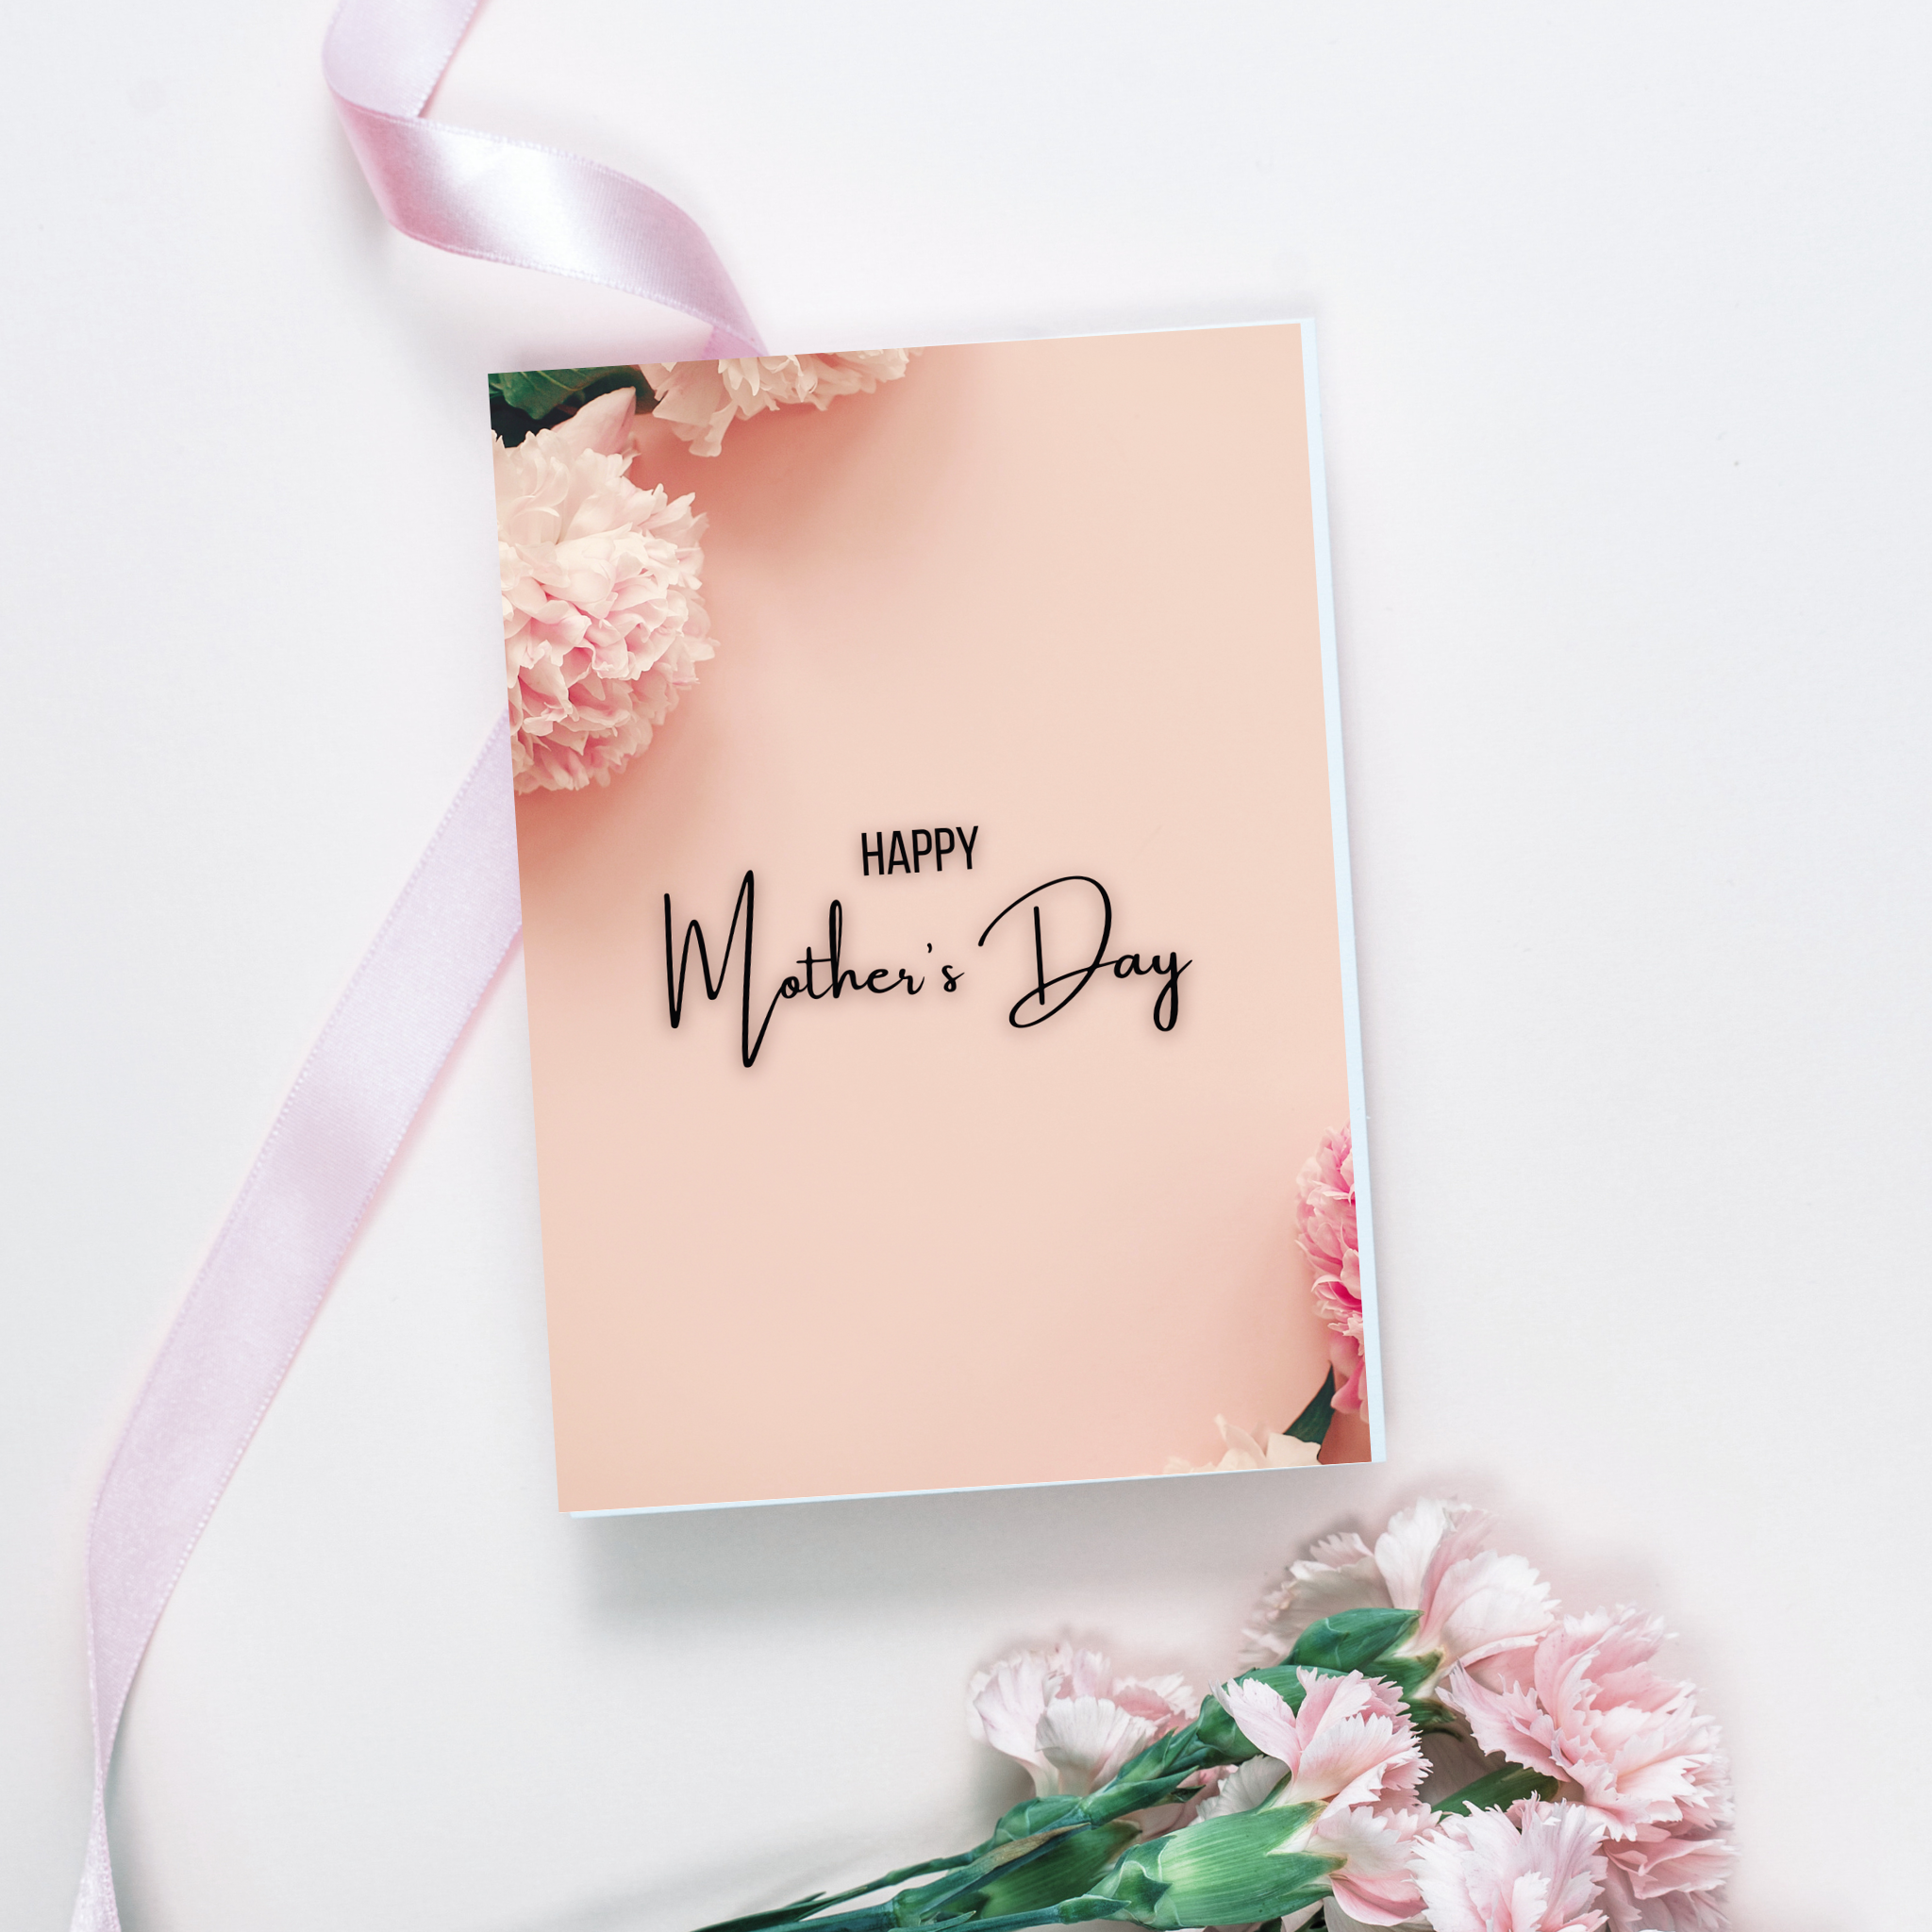 Complimentary Mother's Day Greeting Card and Free Gift